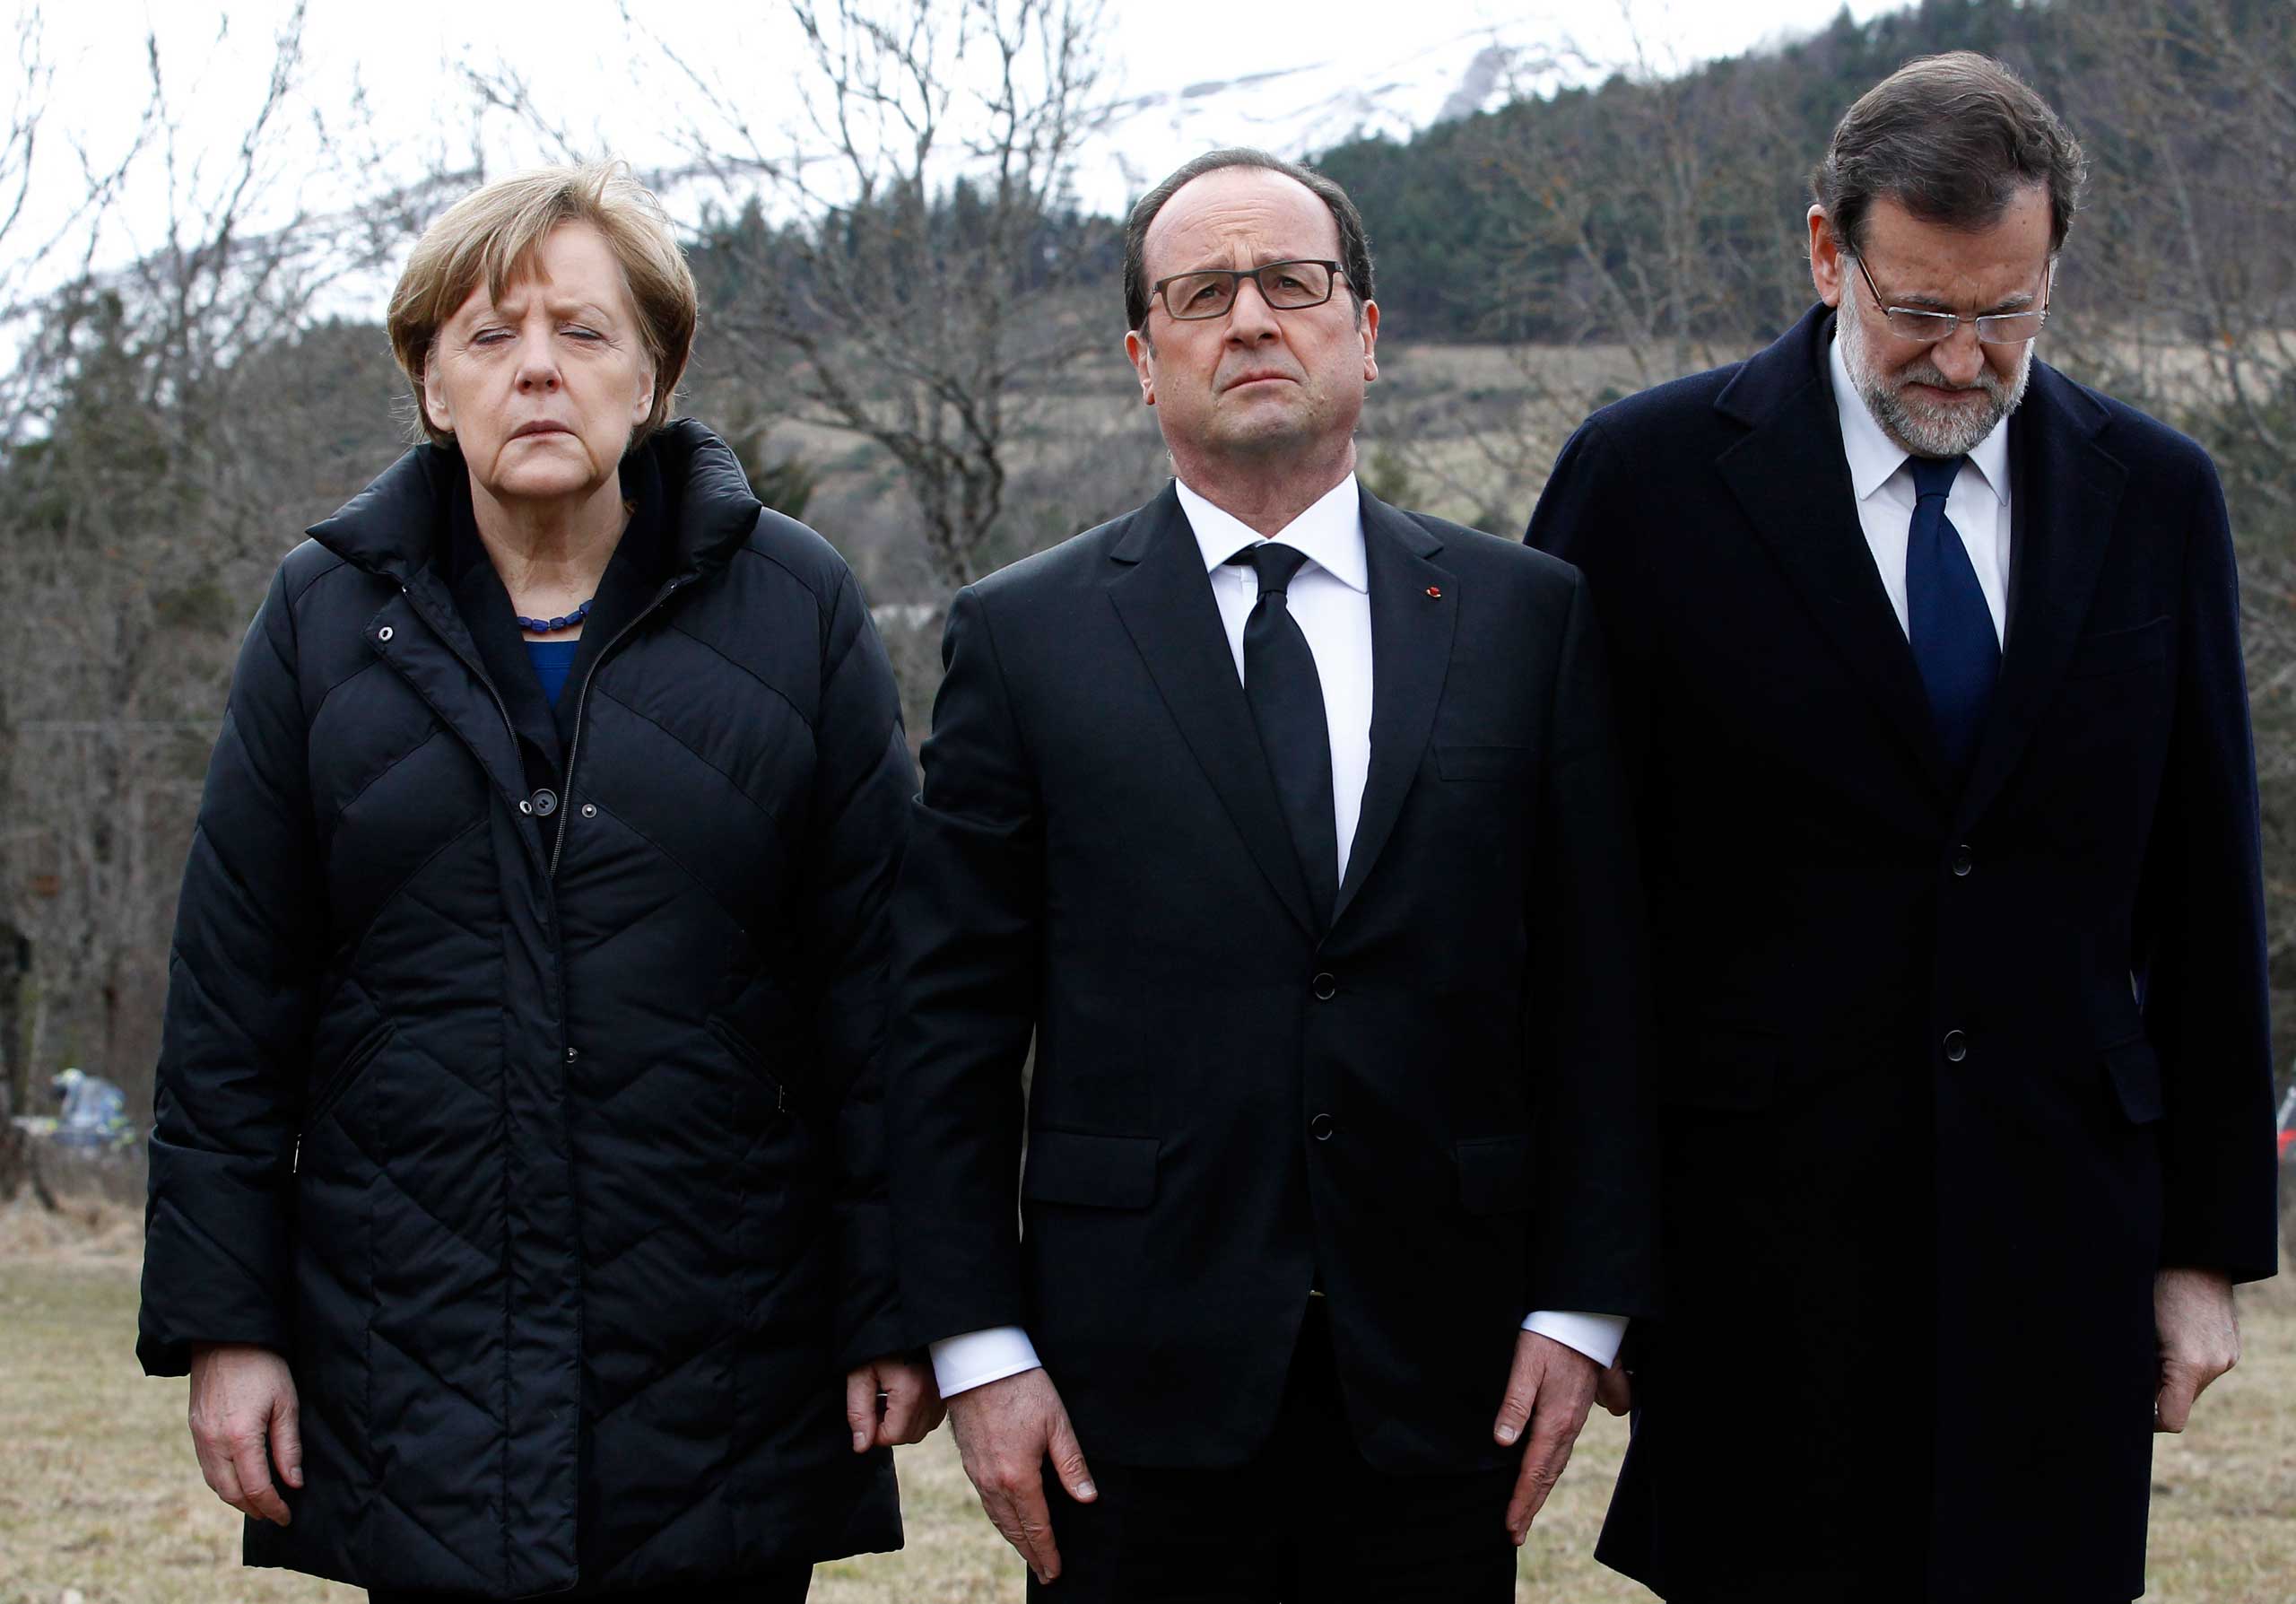 German Chancellor Angela Merkel, French President Francois Hollande, and Spanish Prime Minister Mariano Rajoy pay respect to victims in front of the mountain where a Germanwings jetliner crashed in Le Vernet, France, March 25, 2015.